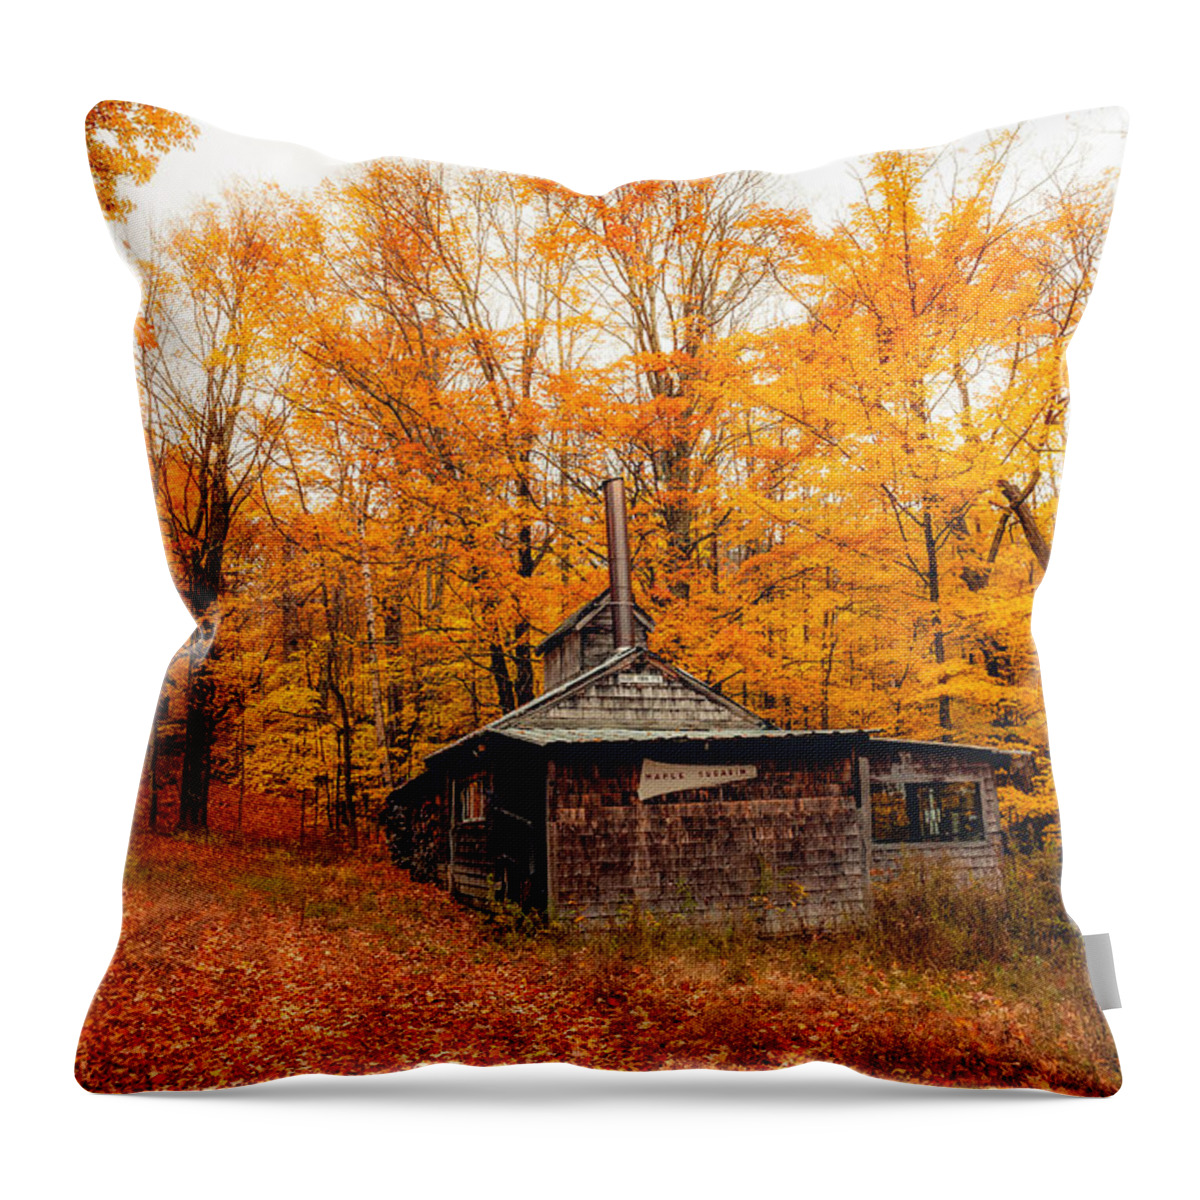 Fall Throw Pillow featuring the photograph Fall At The Sugar House by Robert Clifford